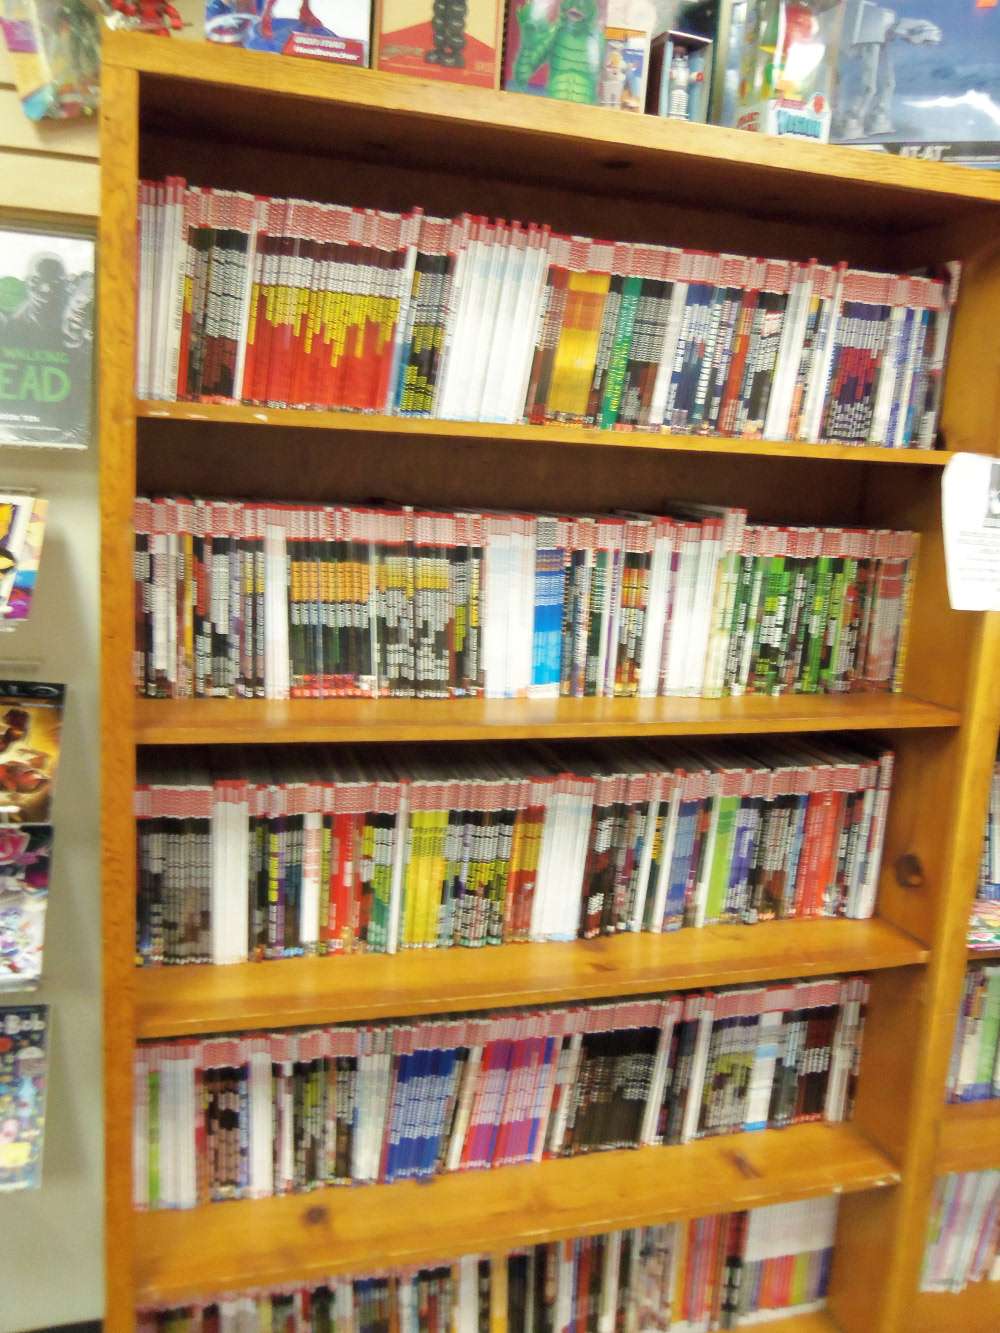 Time Tunnel Comics | 265 2nd Ave SE, Hickory, NC 28602 | Phone: (828) 325-9858